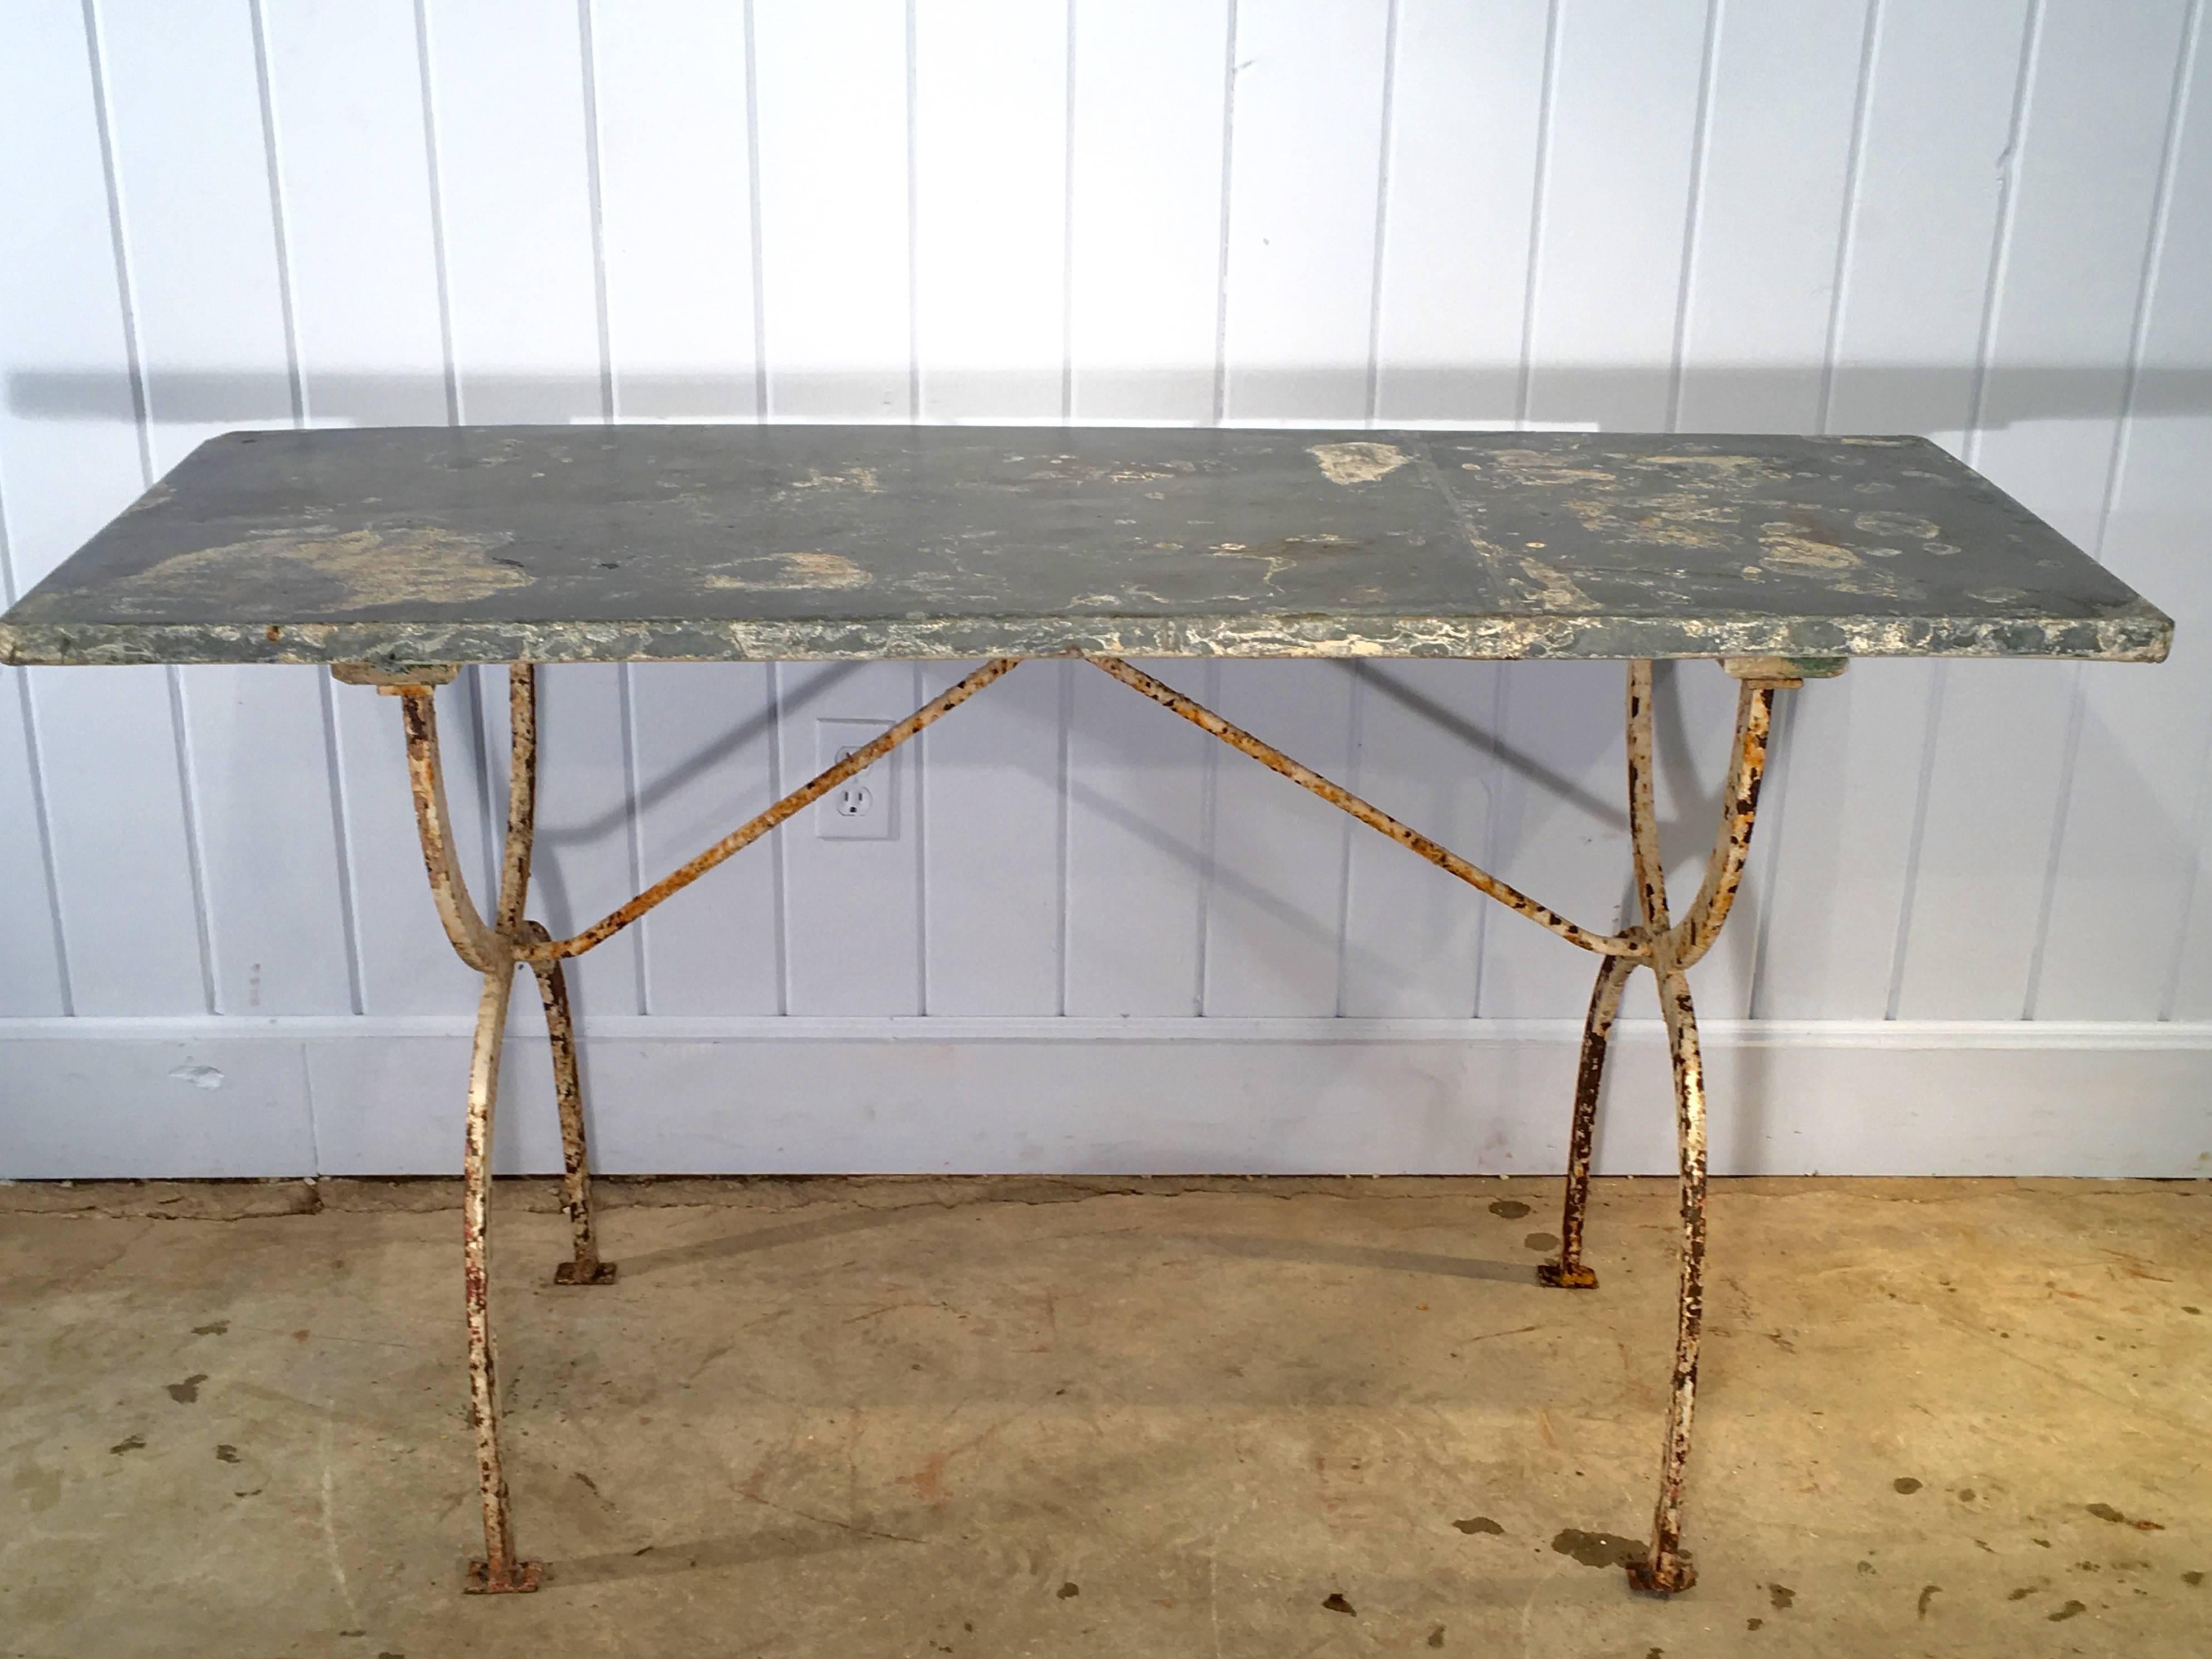 It is difficult to source old and weathered authentic zinc-topped tables and we found two beauties, very close in size. This is the taller of the two (the shorter one has sold). Both have identical wrought-iron bases in an old creamy white painted